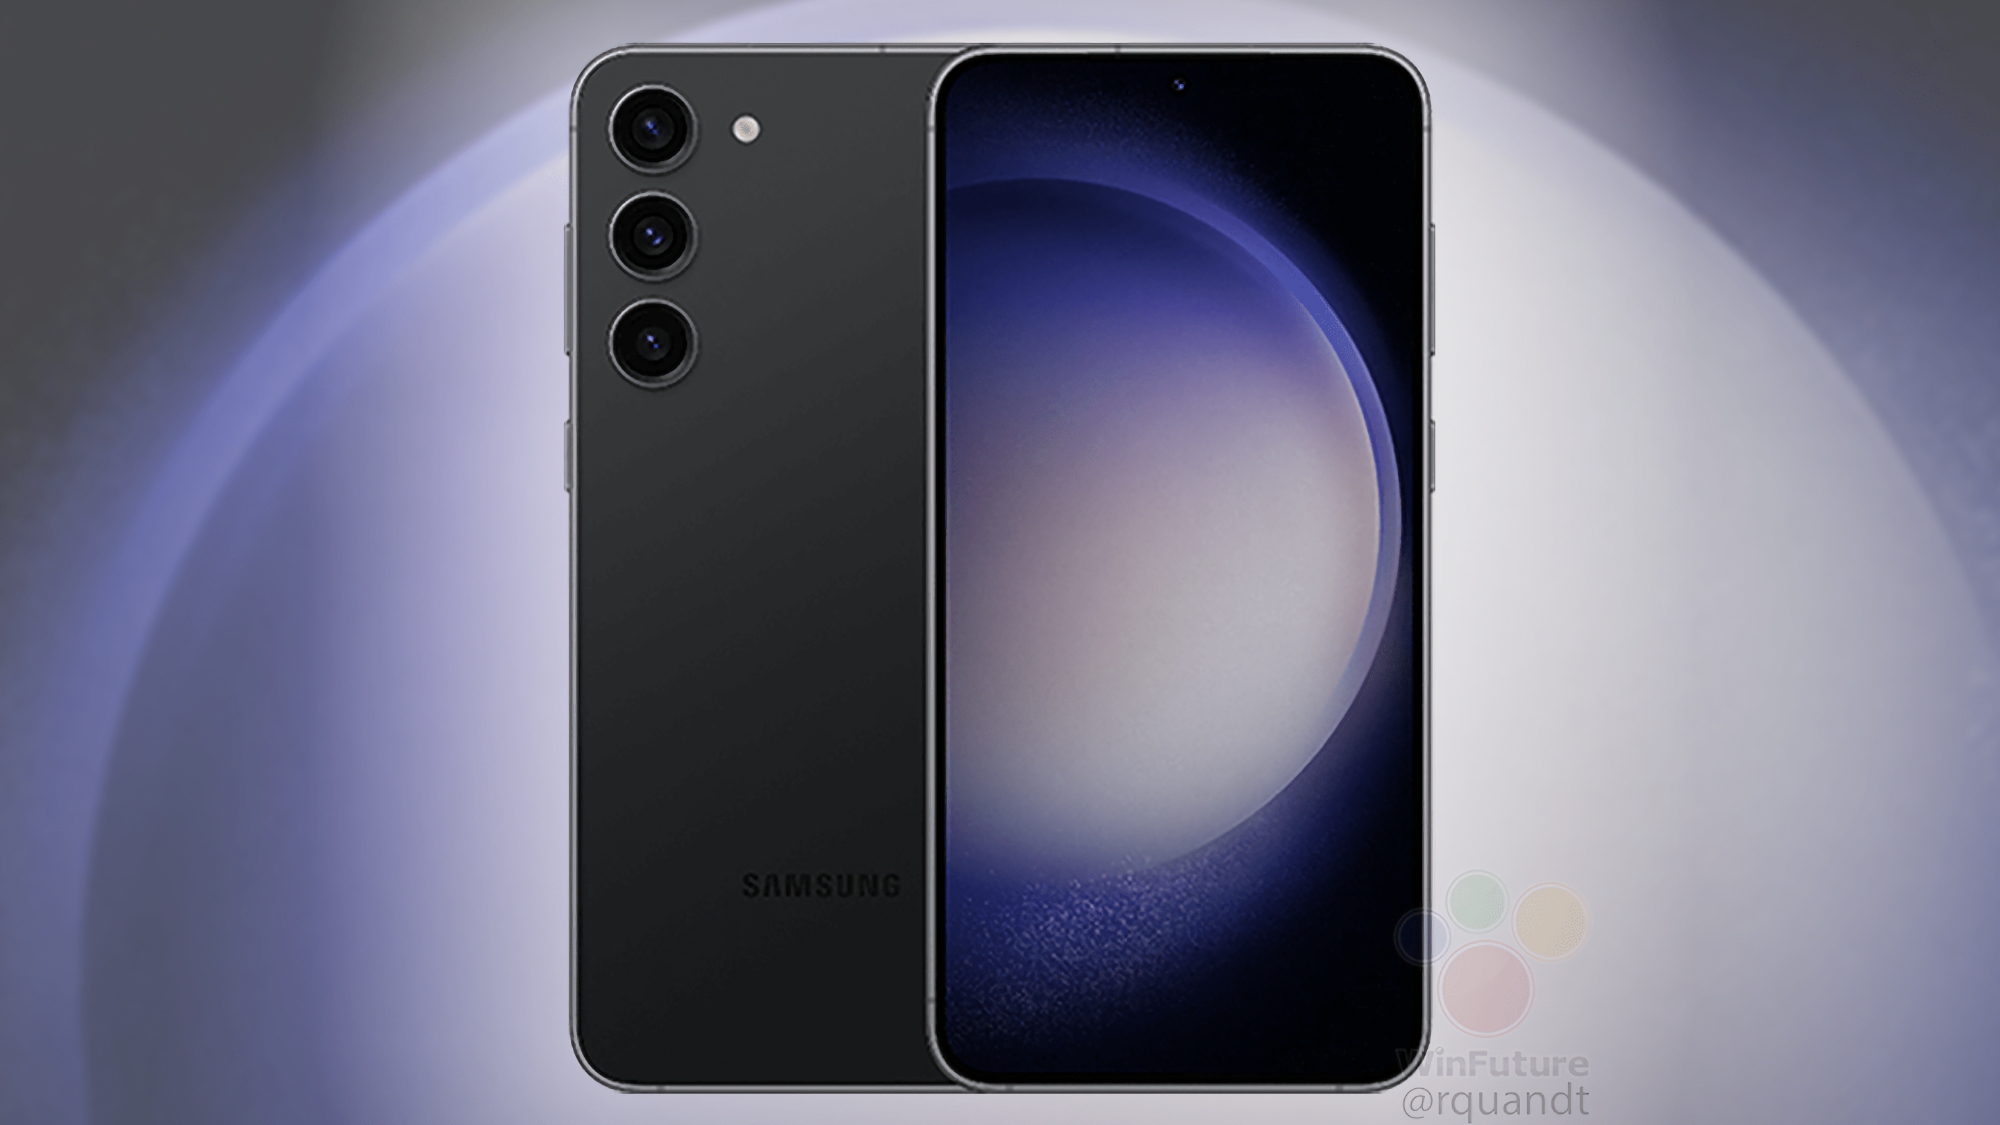 Insider published quality press renders of the Galaxy S23: Here's what Samsung's new flagship will look like